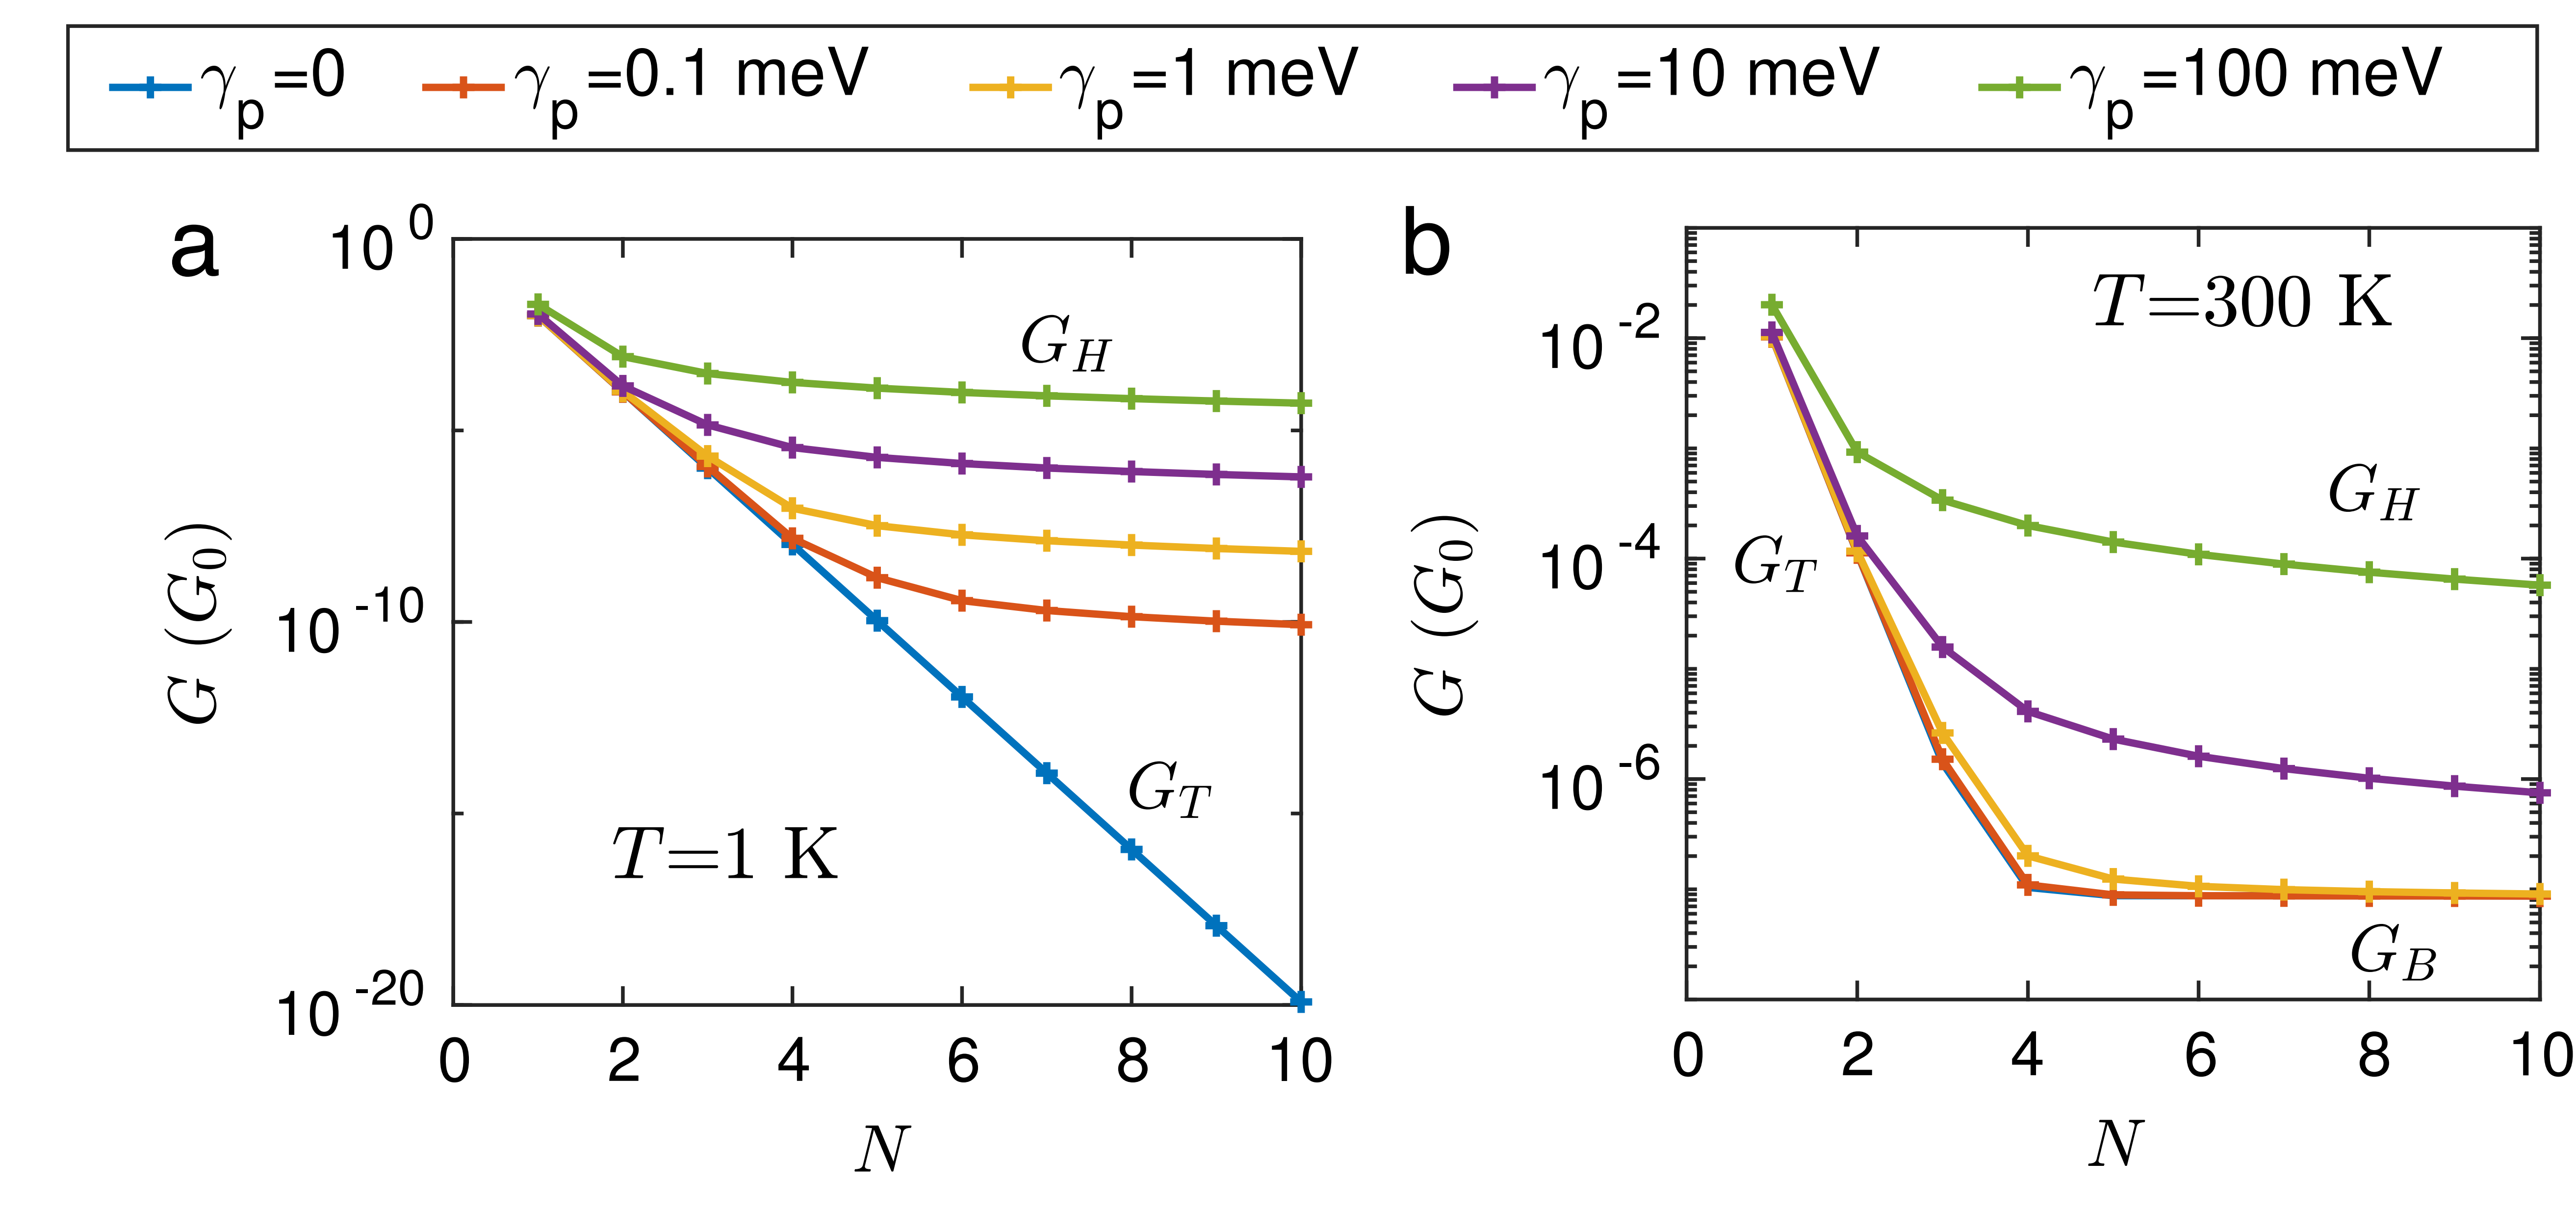 Conductance of a uniform bridge between 2 and 10 sites long. 
												The log-y scale reveals the hopping (linear), tunneling (exponential) 
												and ballistic (constant) conduction mechanisms at different environmental strengths.